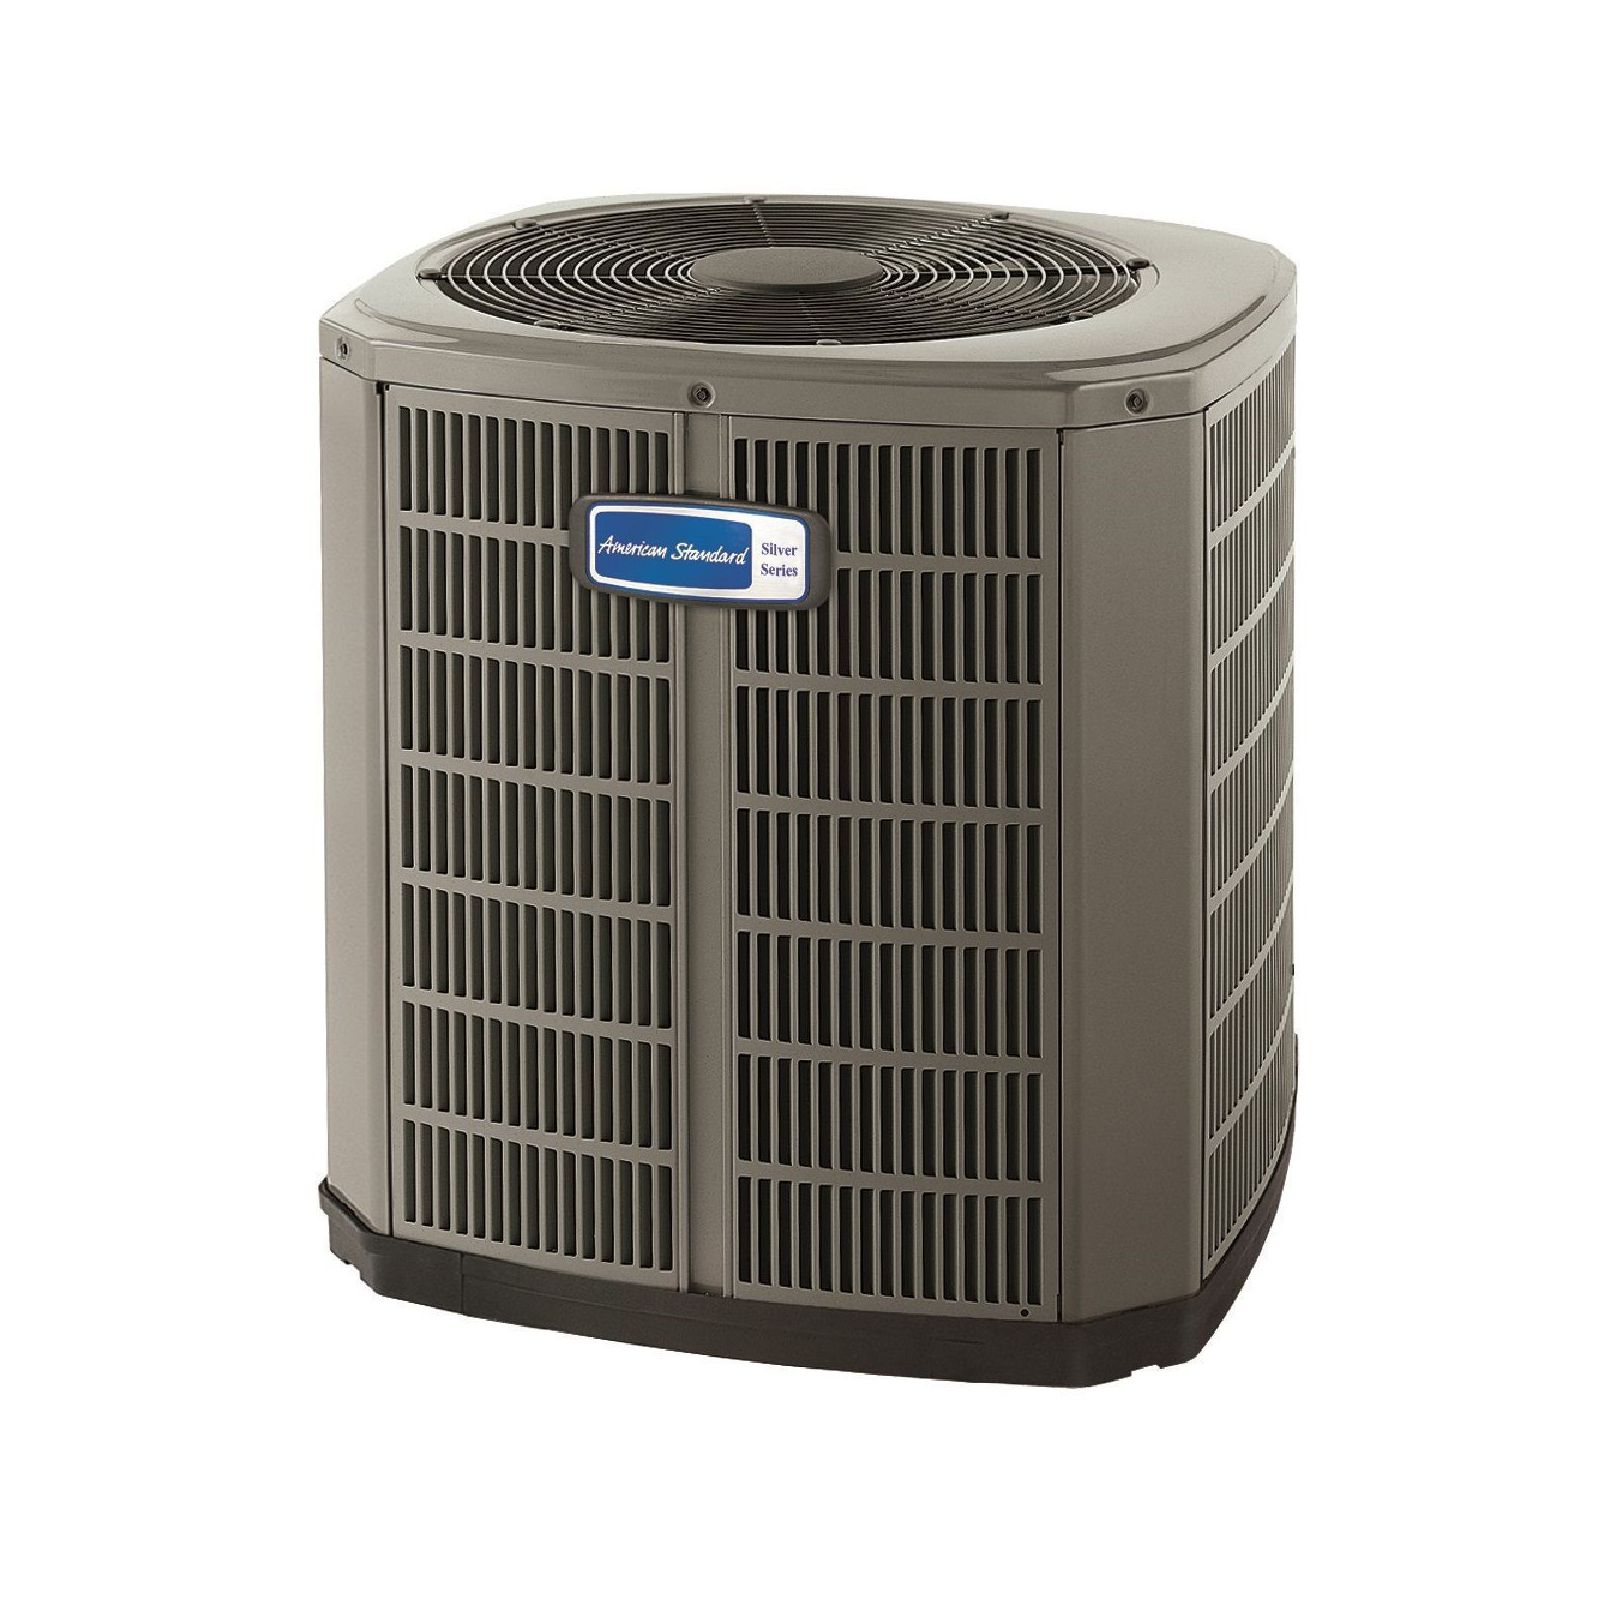 American Standard Heating & Cooling 3 Ton Air Conditioner 1638975